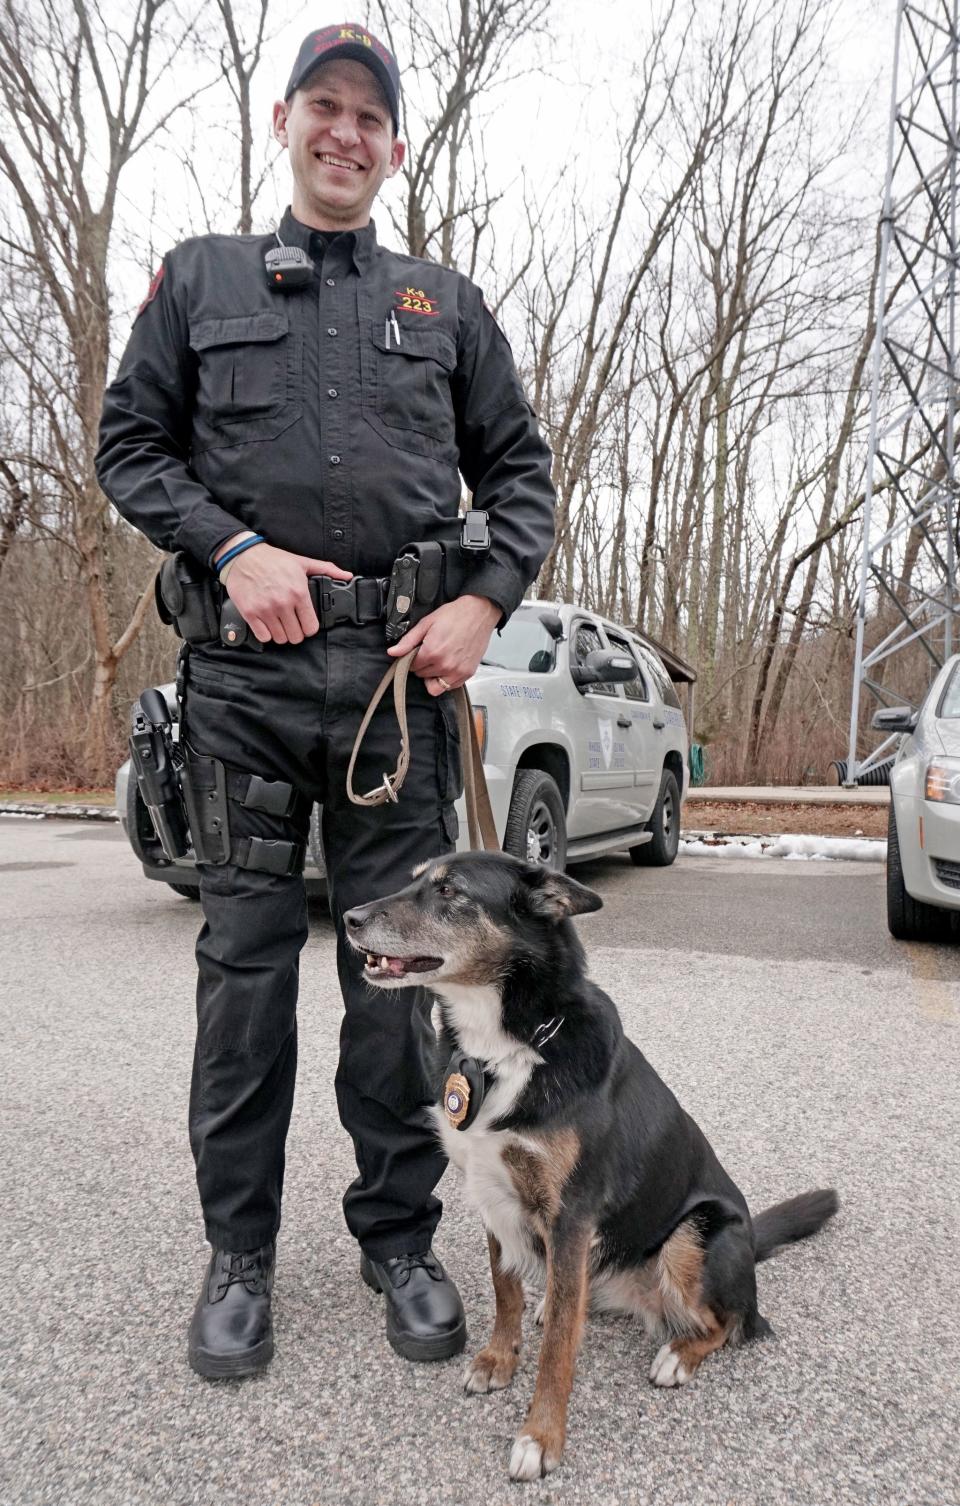 Trooper Daniel S.  O'Neil and Ruby pose for a photograph at the Wickford State Police barracks in 2018 when Ruby was nominated for an American Humane Hero Dog Award.